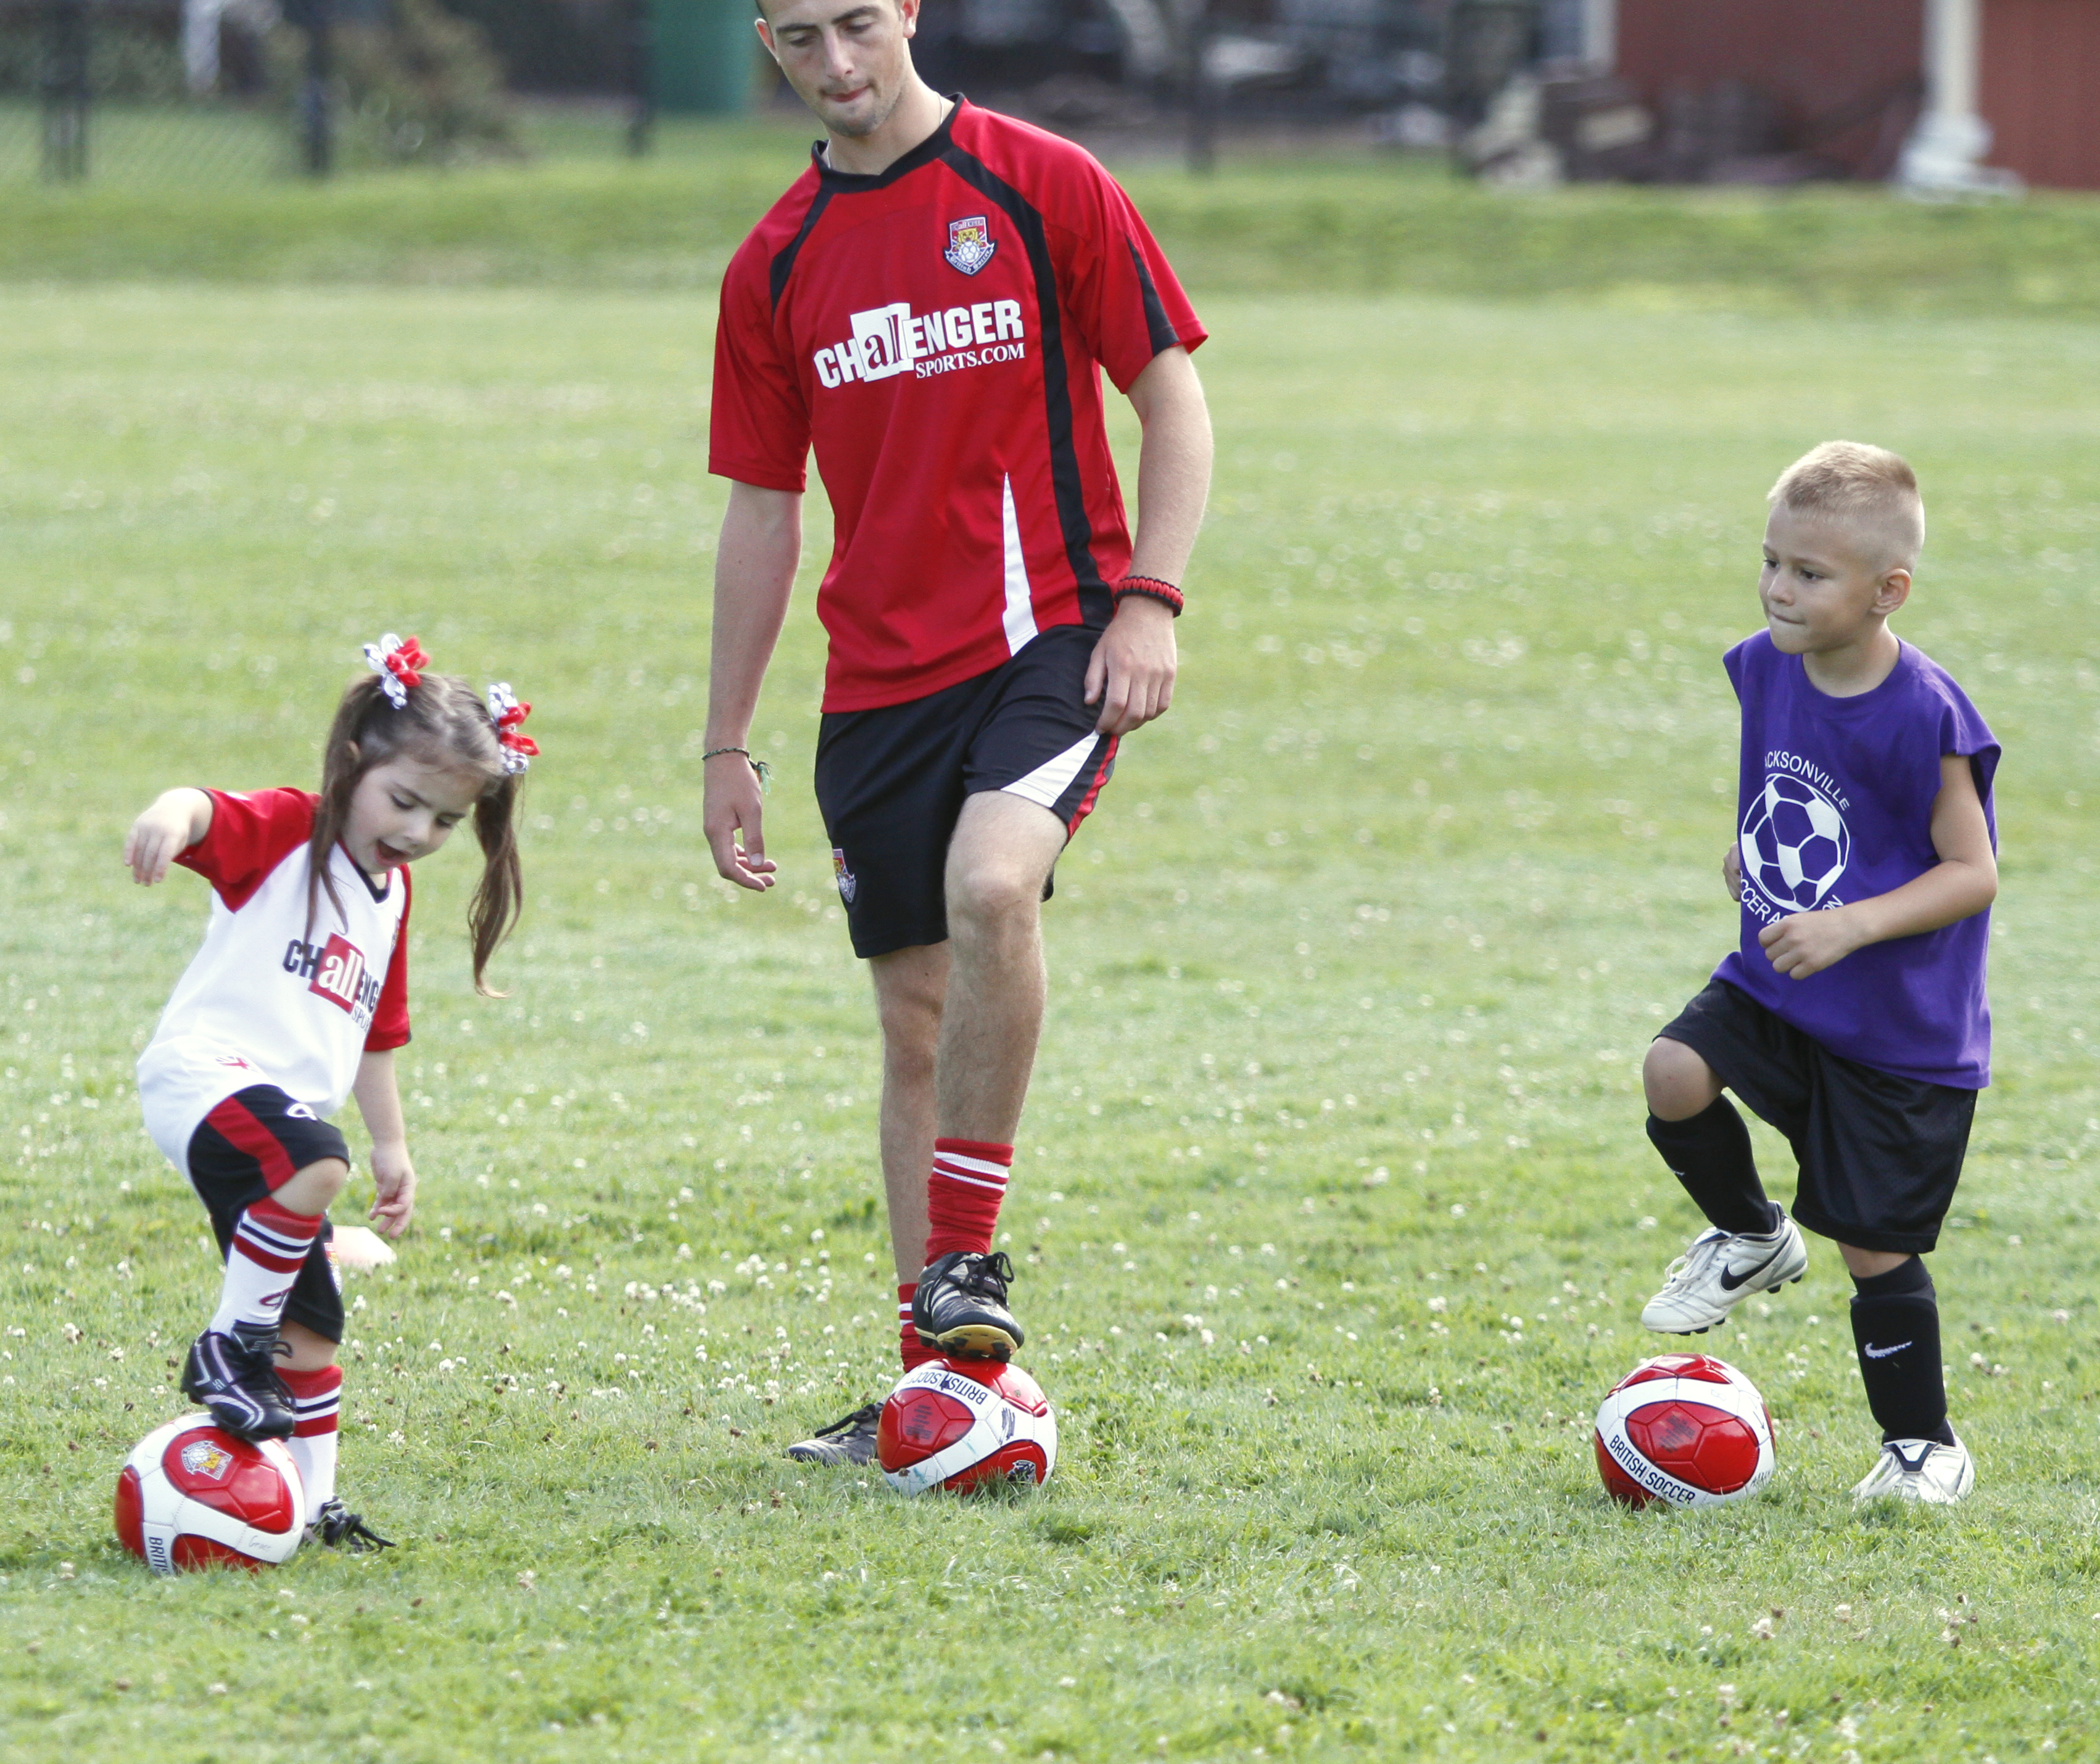        ROBERT K. YOSAY  | THE VINDICATOR

Grace Gershkowitz 4 of Canfield and Abram Davidson 5 of Austintown -  get linstuctions from  John Evans

British soccer camp   Wick Recreation Area of MillCreek Park week-long soccer camp focuses on building skills to play the game along with sportsmanship